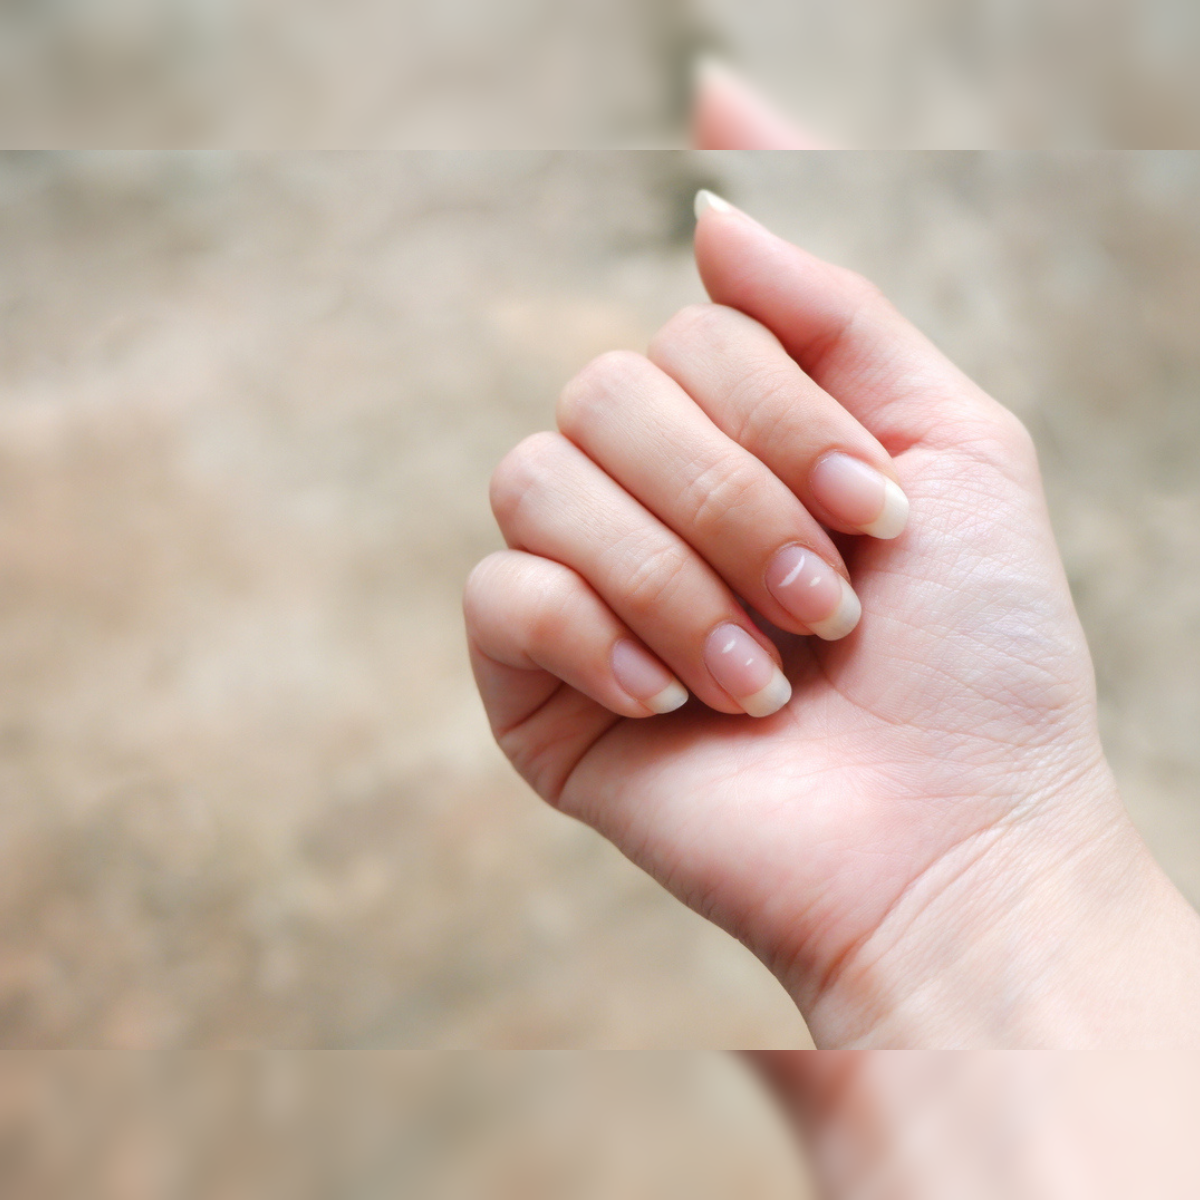 6 Signs Your Fingernails Are Trying To Tell You Something - Organic Olivia  | Nail health signs, Fingernail health, Fingernail health signs